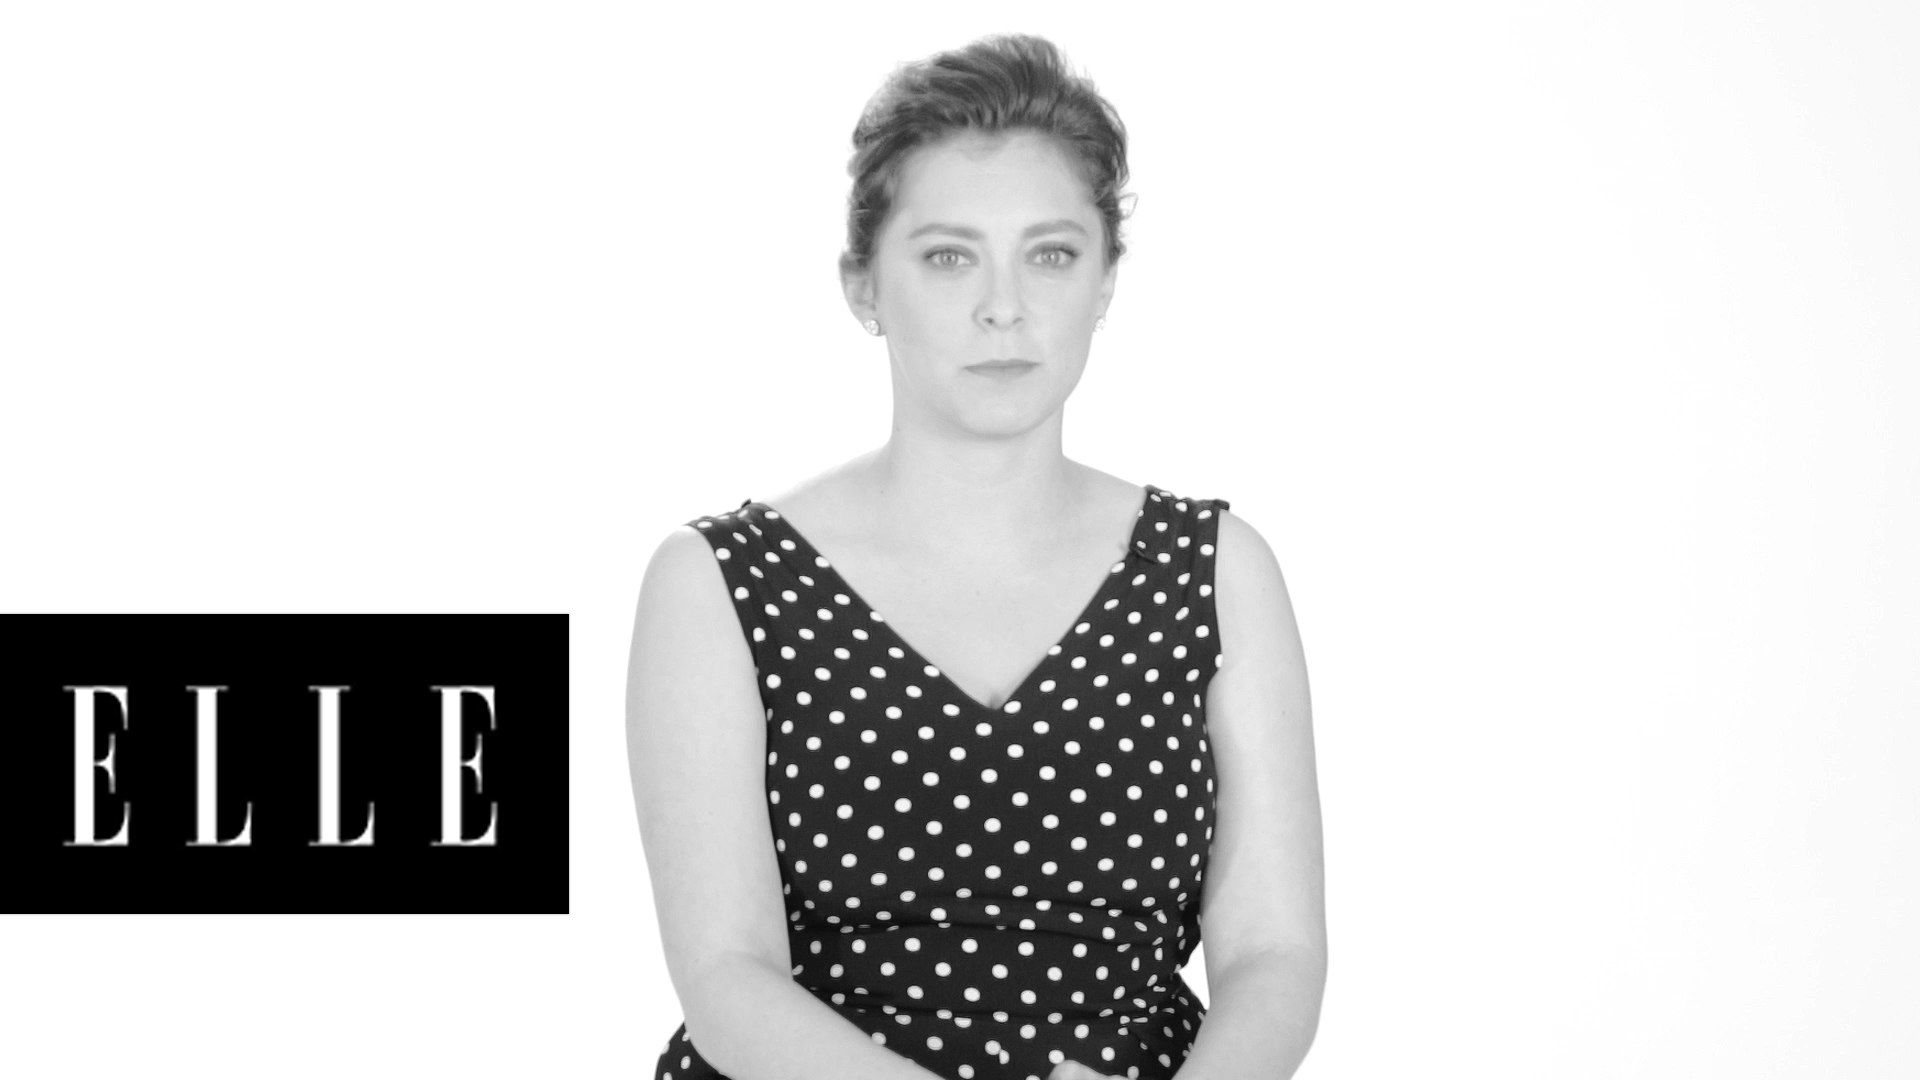 Rachel Bloom Opens Up About Breast Reduction Surgery Experience